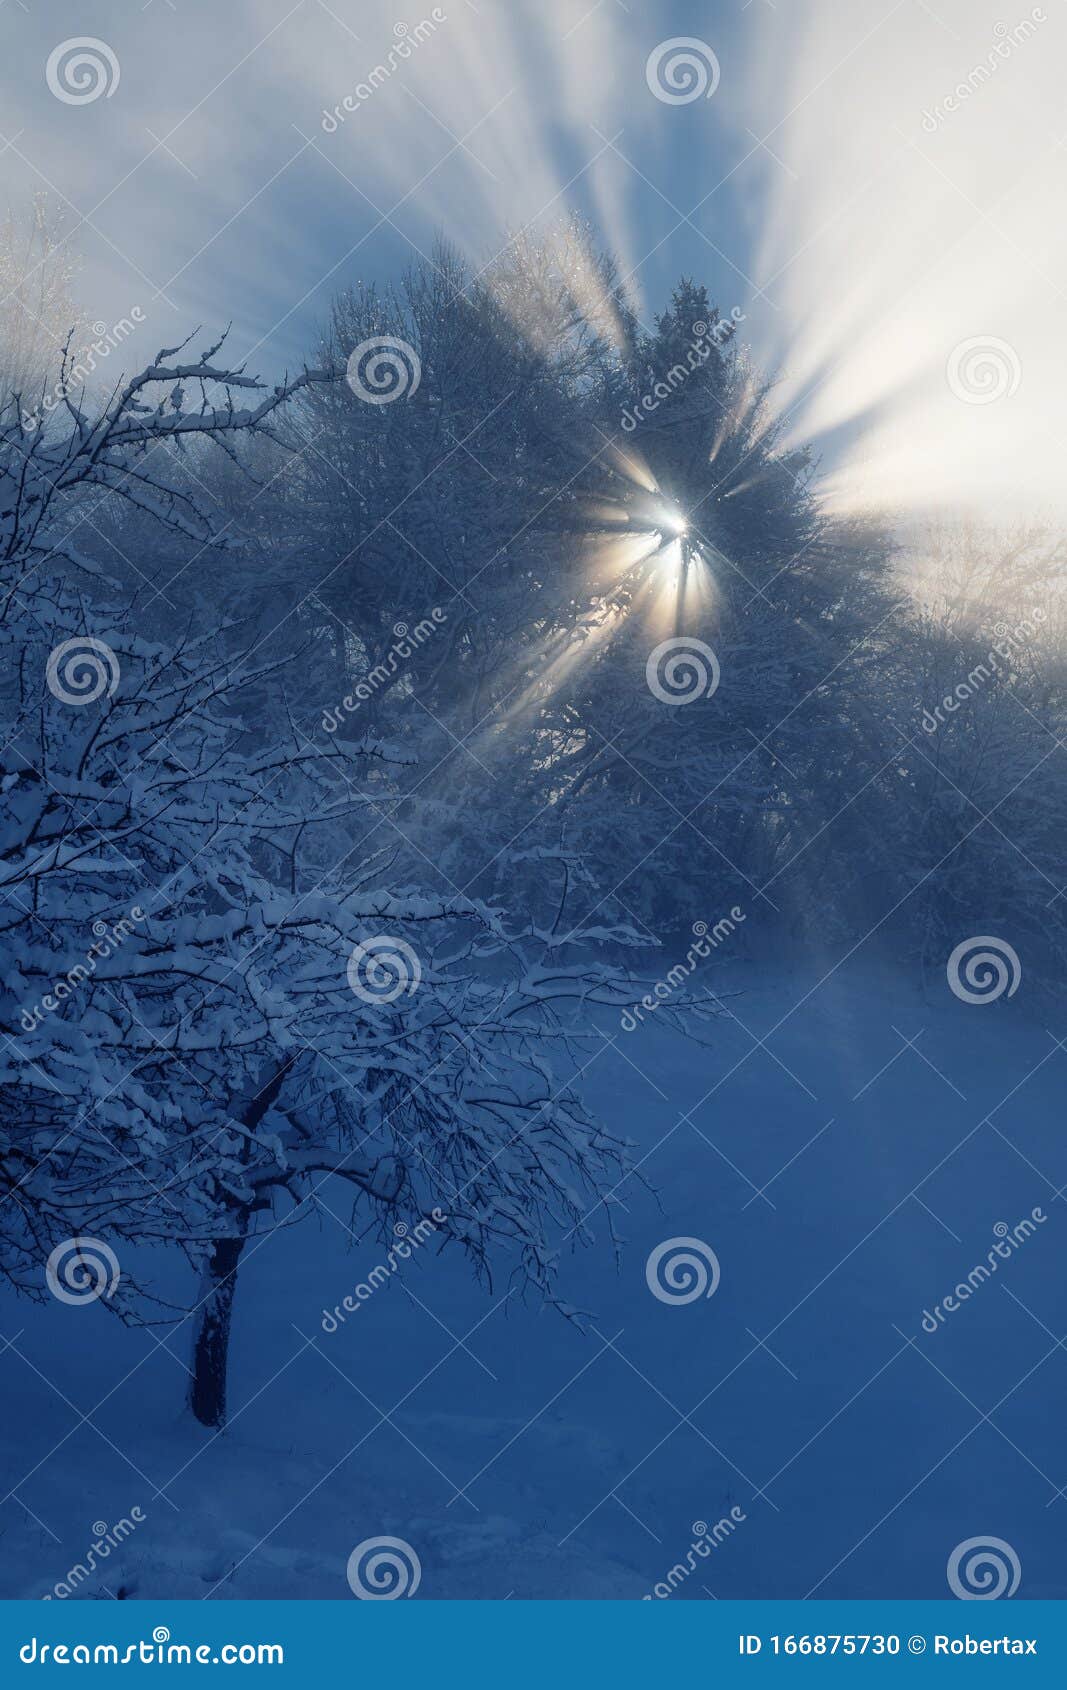 Heavenly Sun Rays Shining through Tree Branches on a Foggy Winter